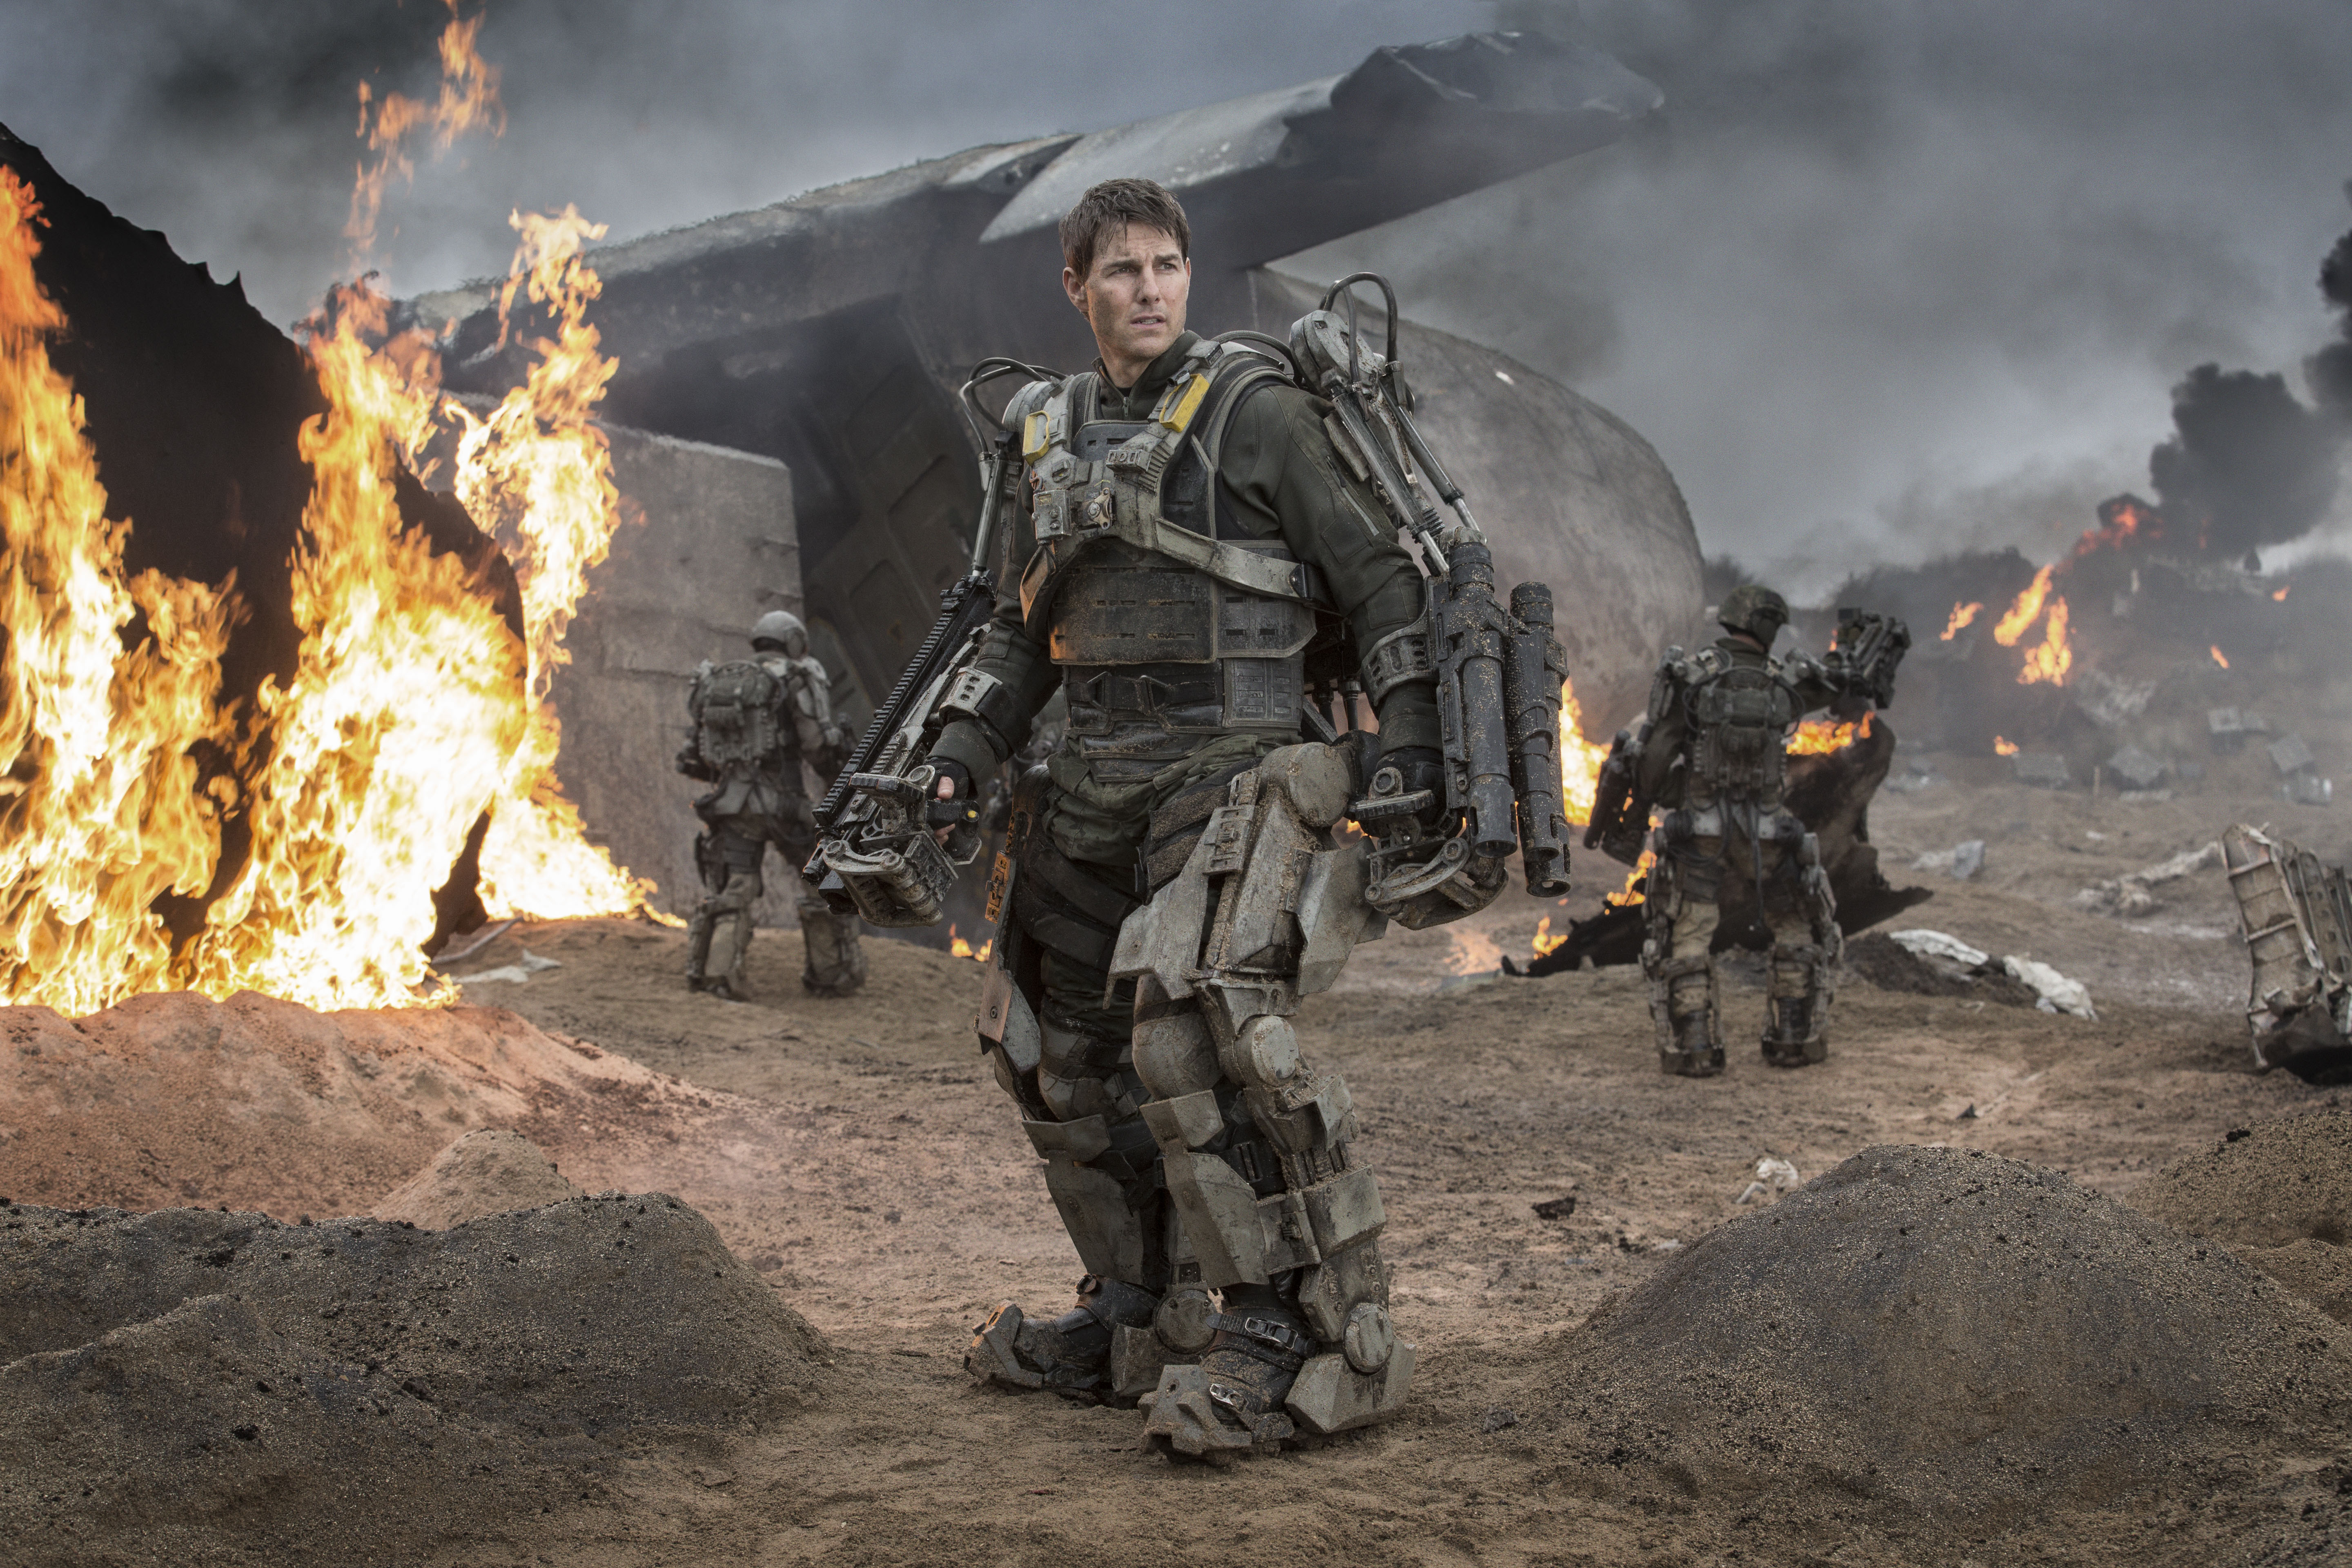 Amazing Edge Of Tomorrow Pictures & Backgrounds